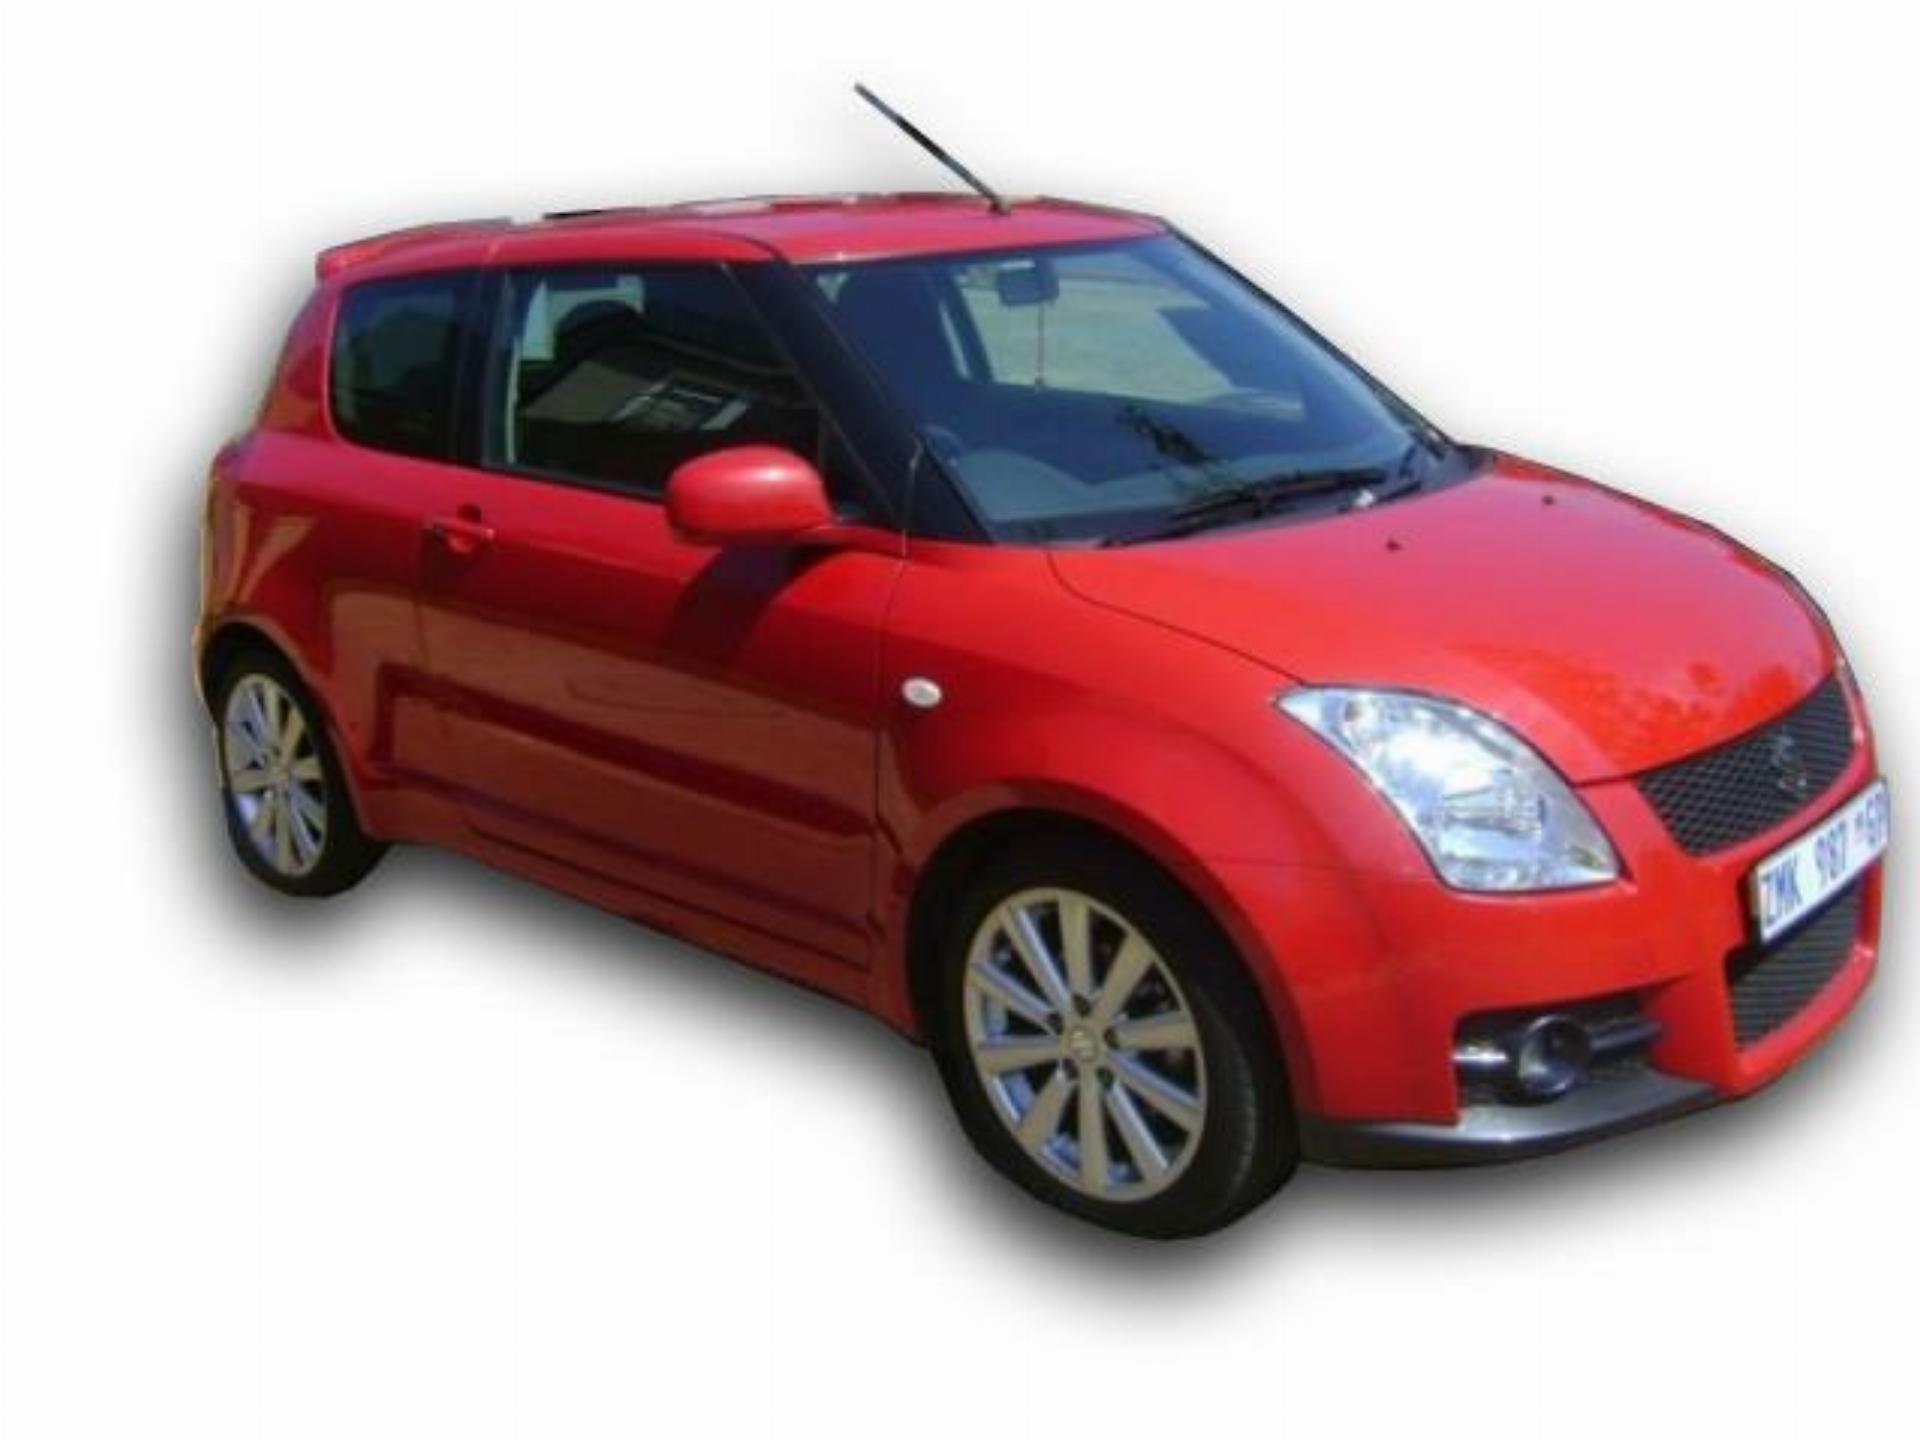 Used Suzuki Swift 1.6 Sport Limited Edition 2010 on auction - PV1004199